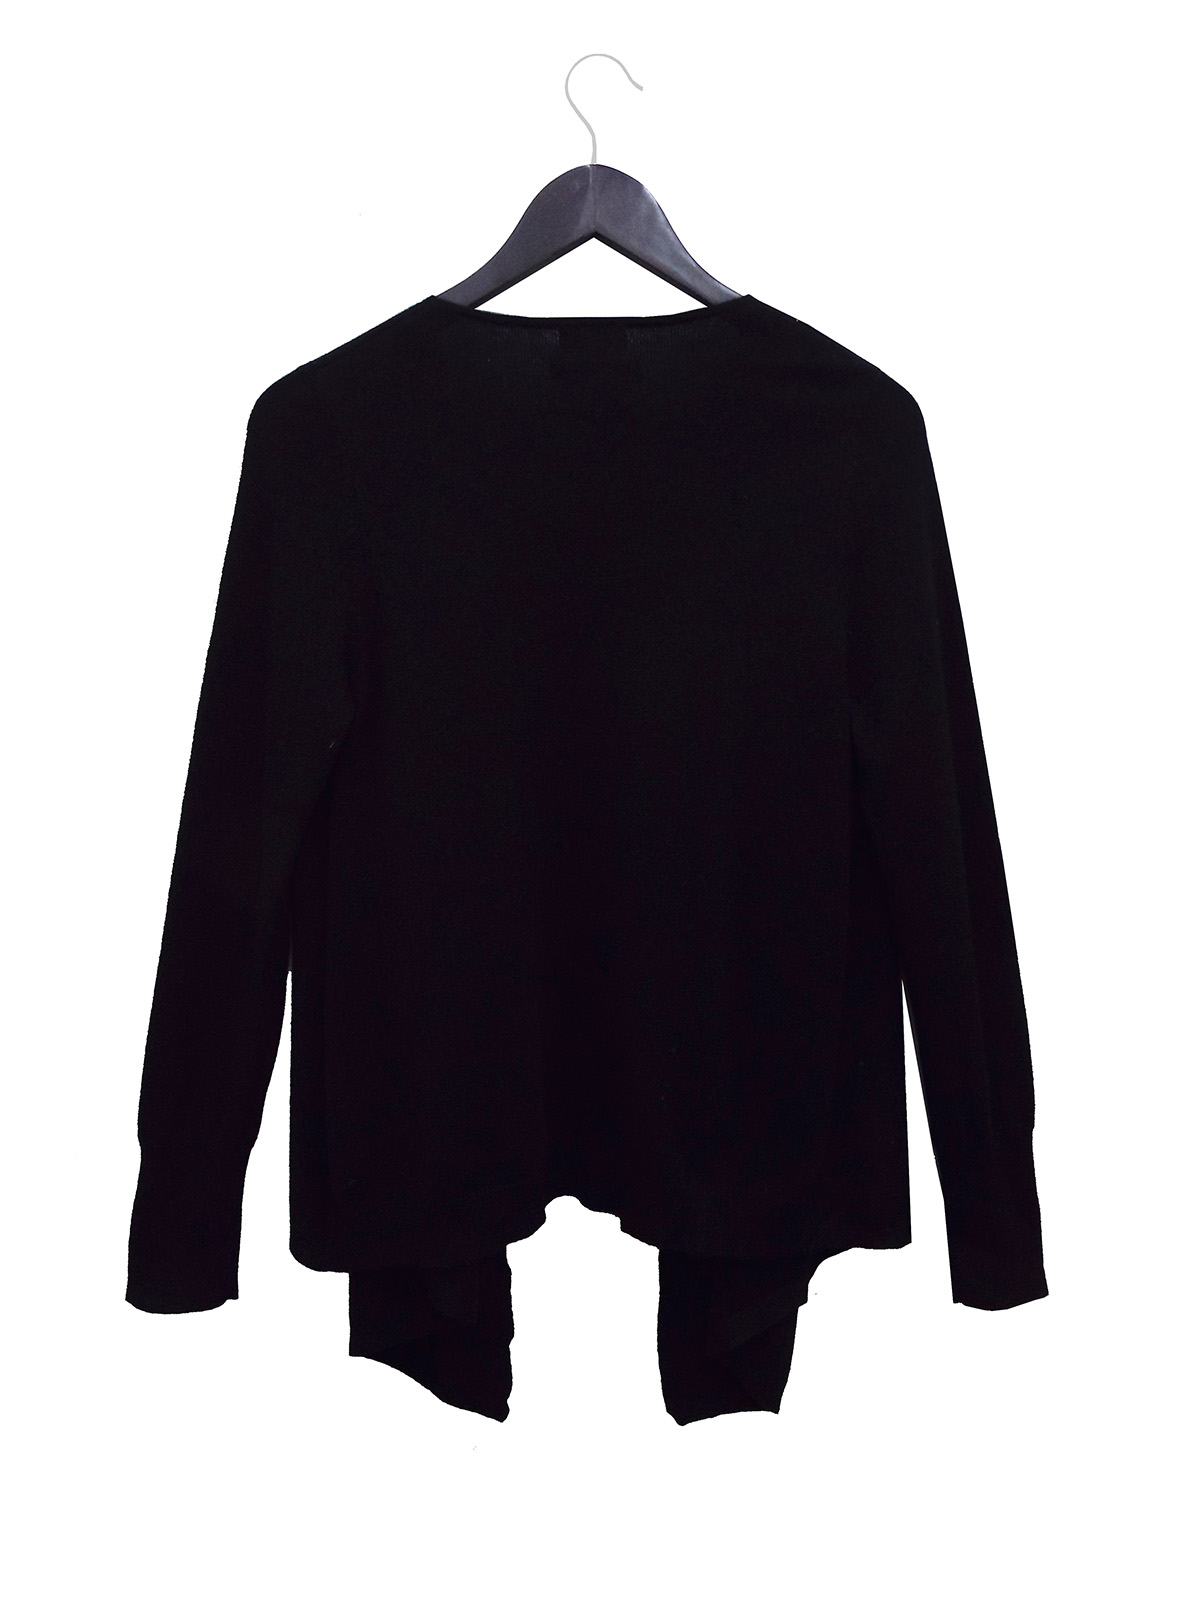 F&F - - F&F BLACK Pure Cashmere Open Front Waterfall Cardigan - Size 8 ...